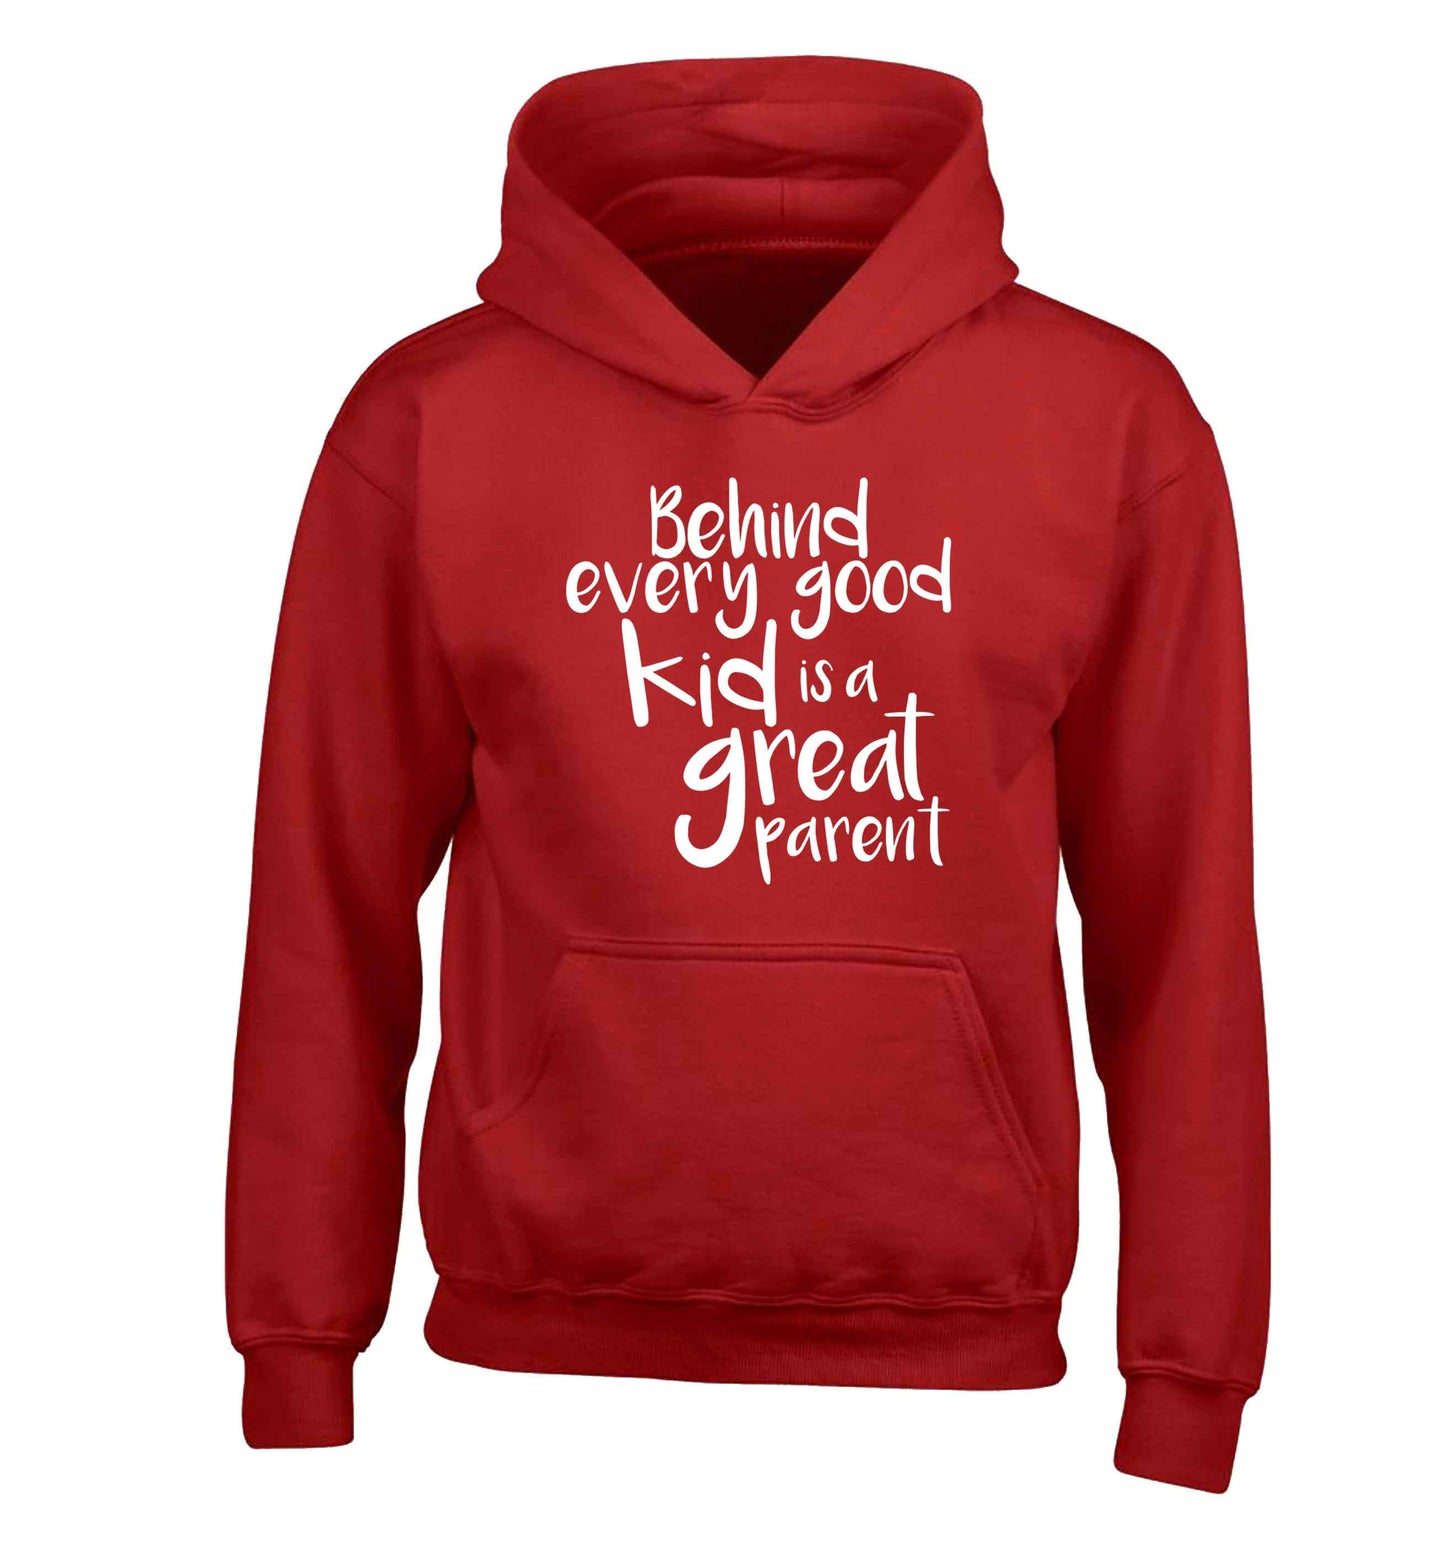 Behind every good kid is a great parent children's red hoodie 12-13 Years